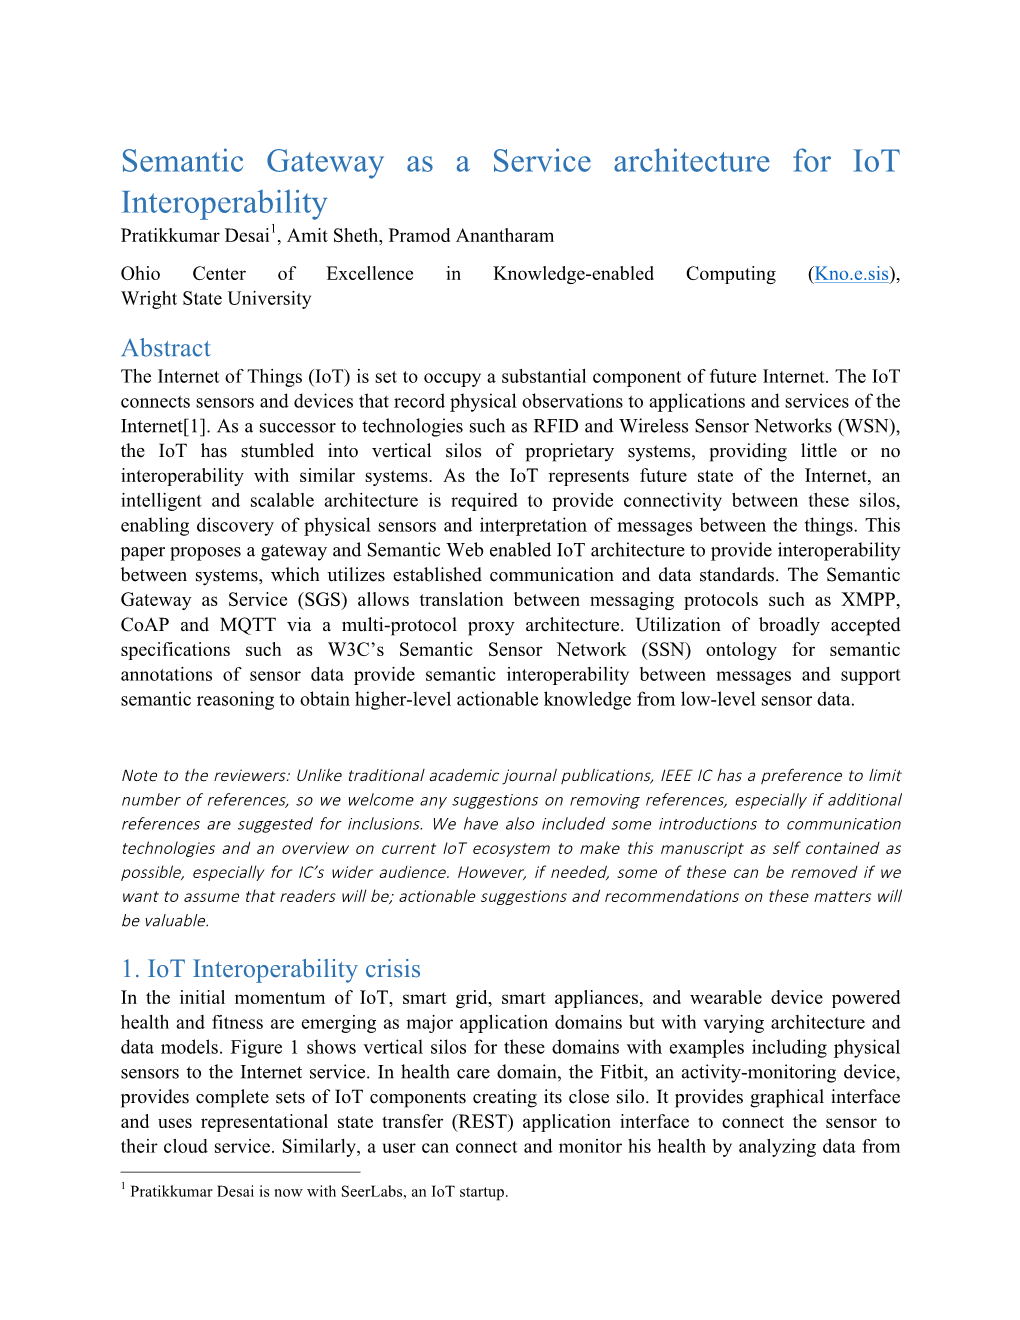 Semantic Gateway As a Service Architecture for Iot Interoperability